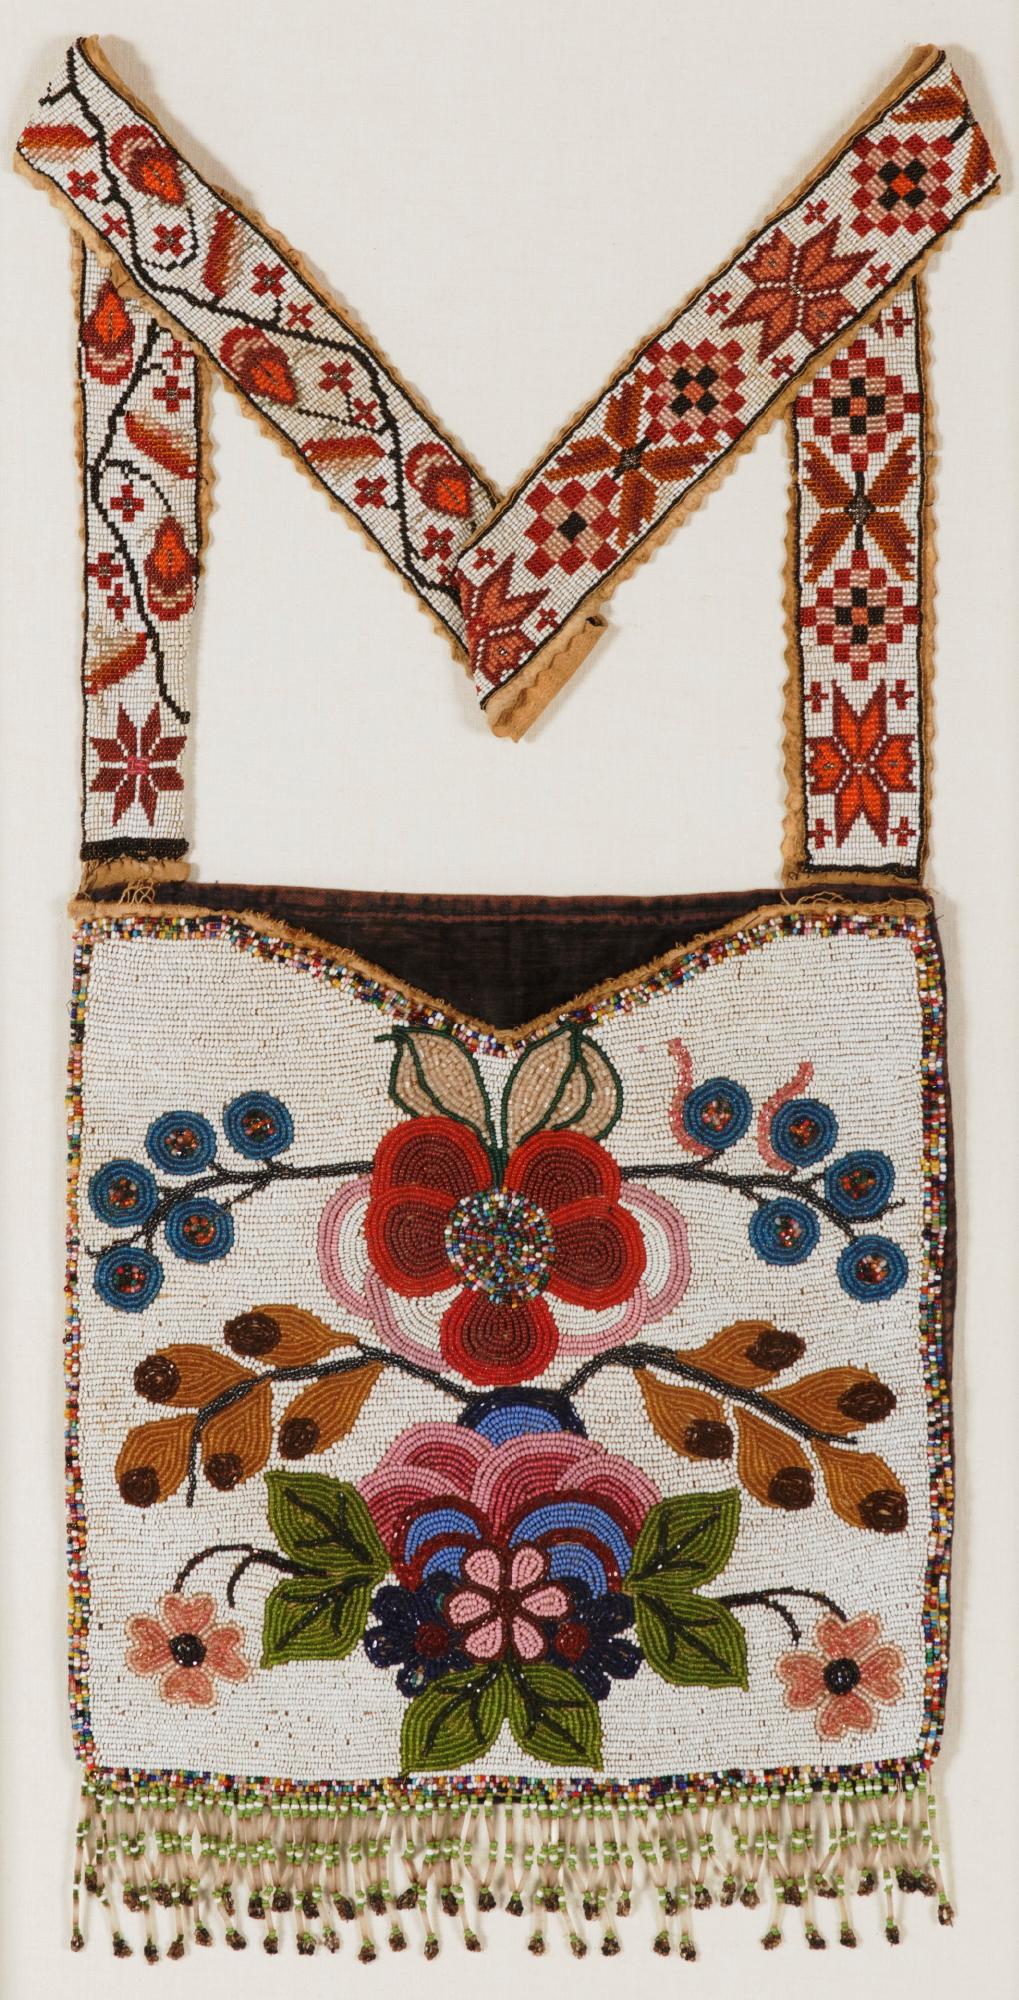 Native American bandolier bag, constructed of deer or elk hide, muslin, and velvet, with wonderful beadwork decoration. Made circa 1885, the floral imagery on the face is bold and colorful, with reds, pinks, blues, greens, brown and gold. This